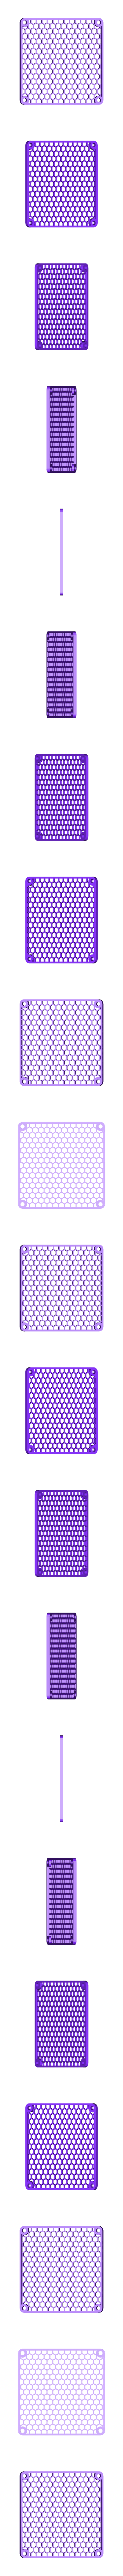 92mm_honeycomb_reduced_fan_cover.stl Download free STL file Customizable Fan Grill Cover • 3D print design, MightyNozzle